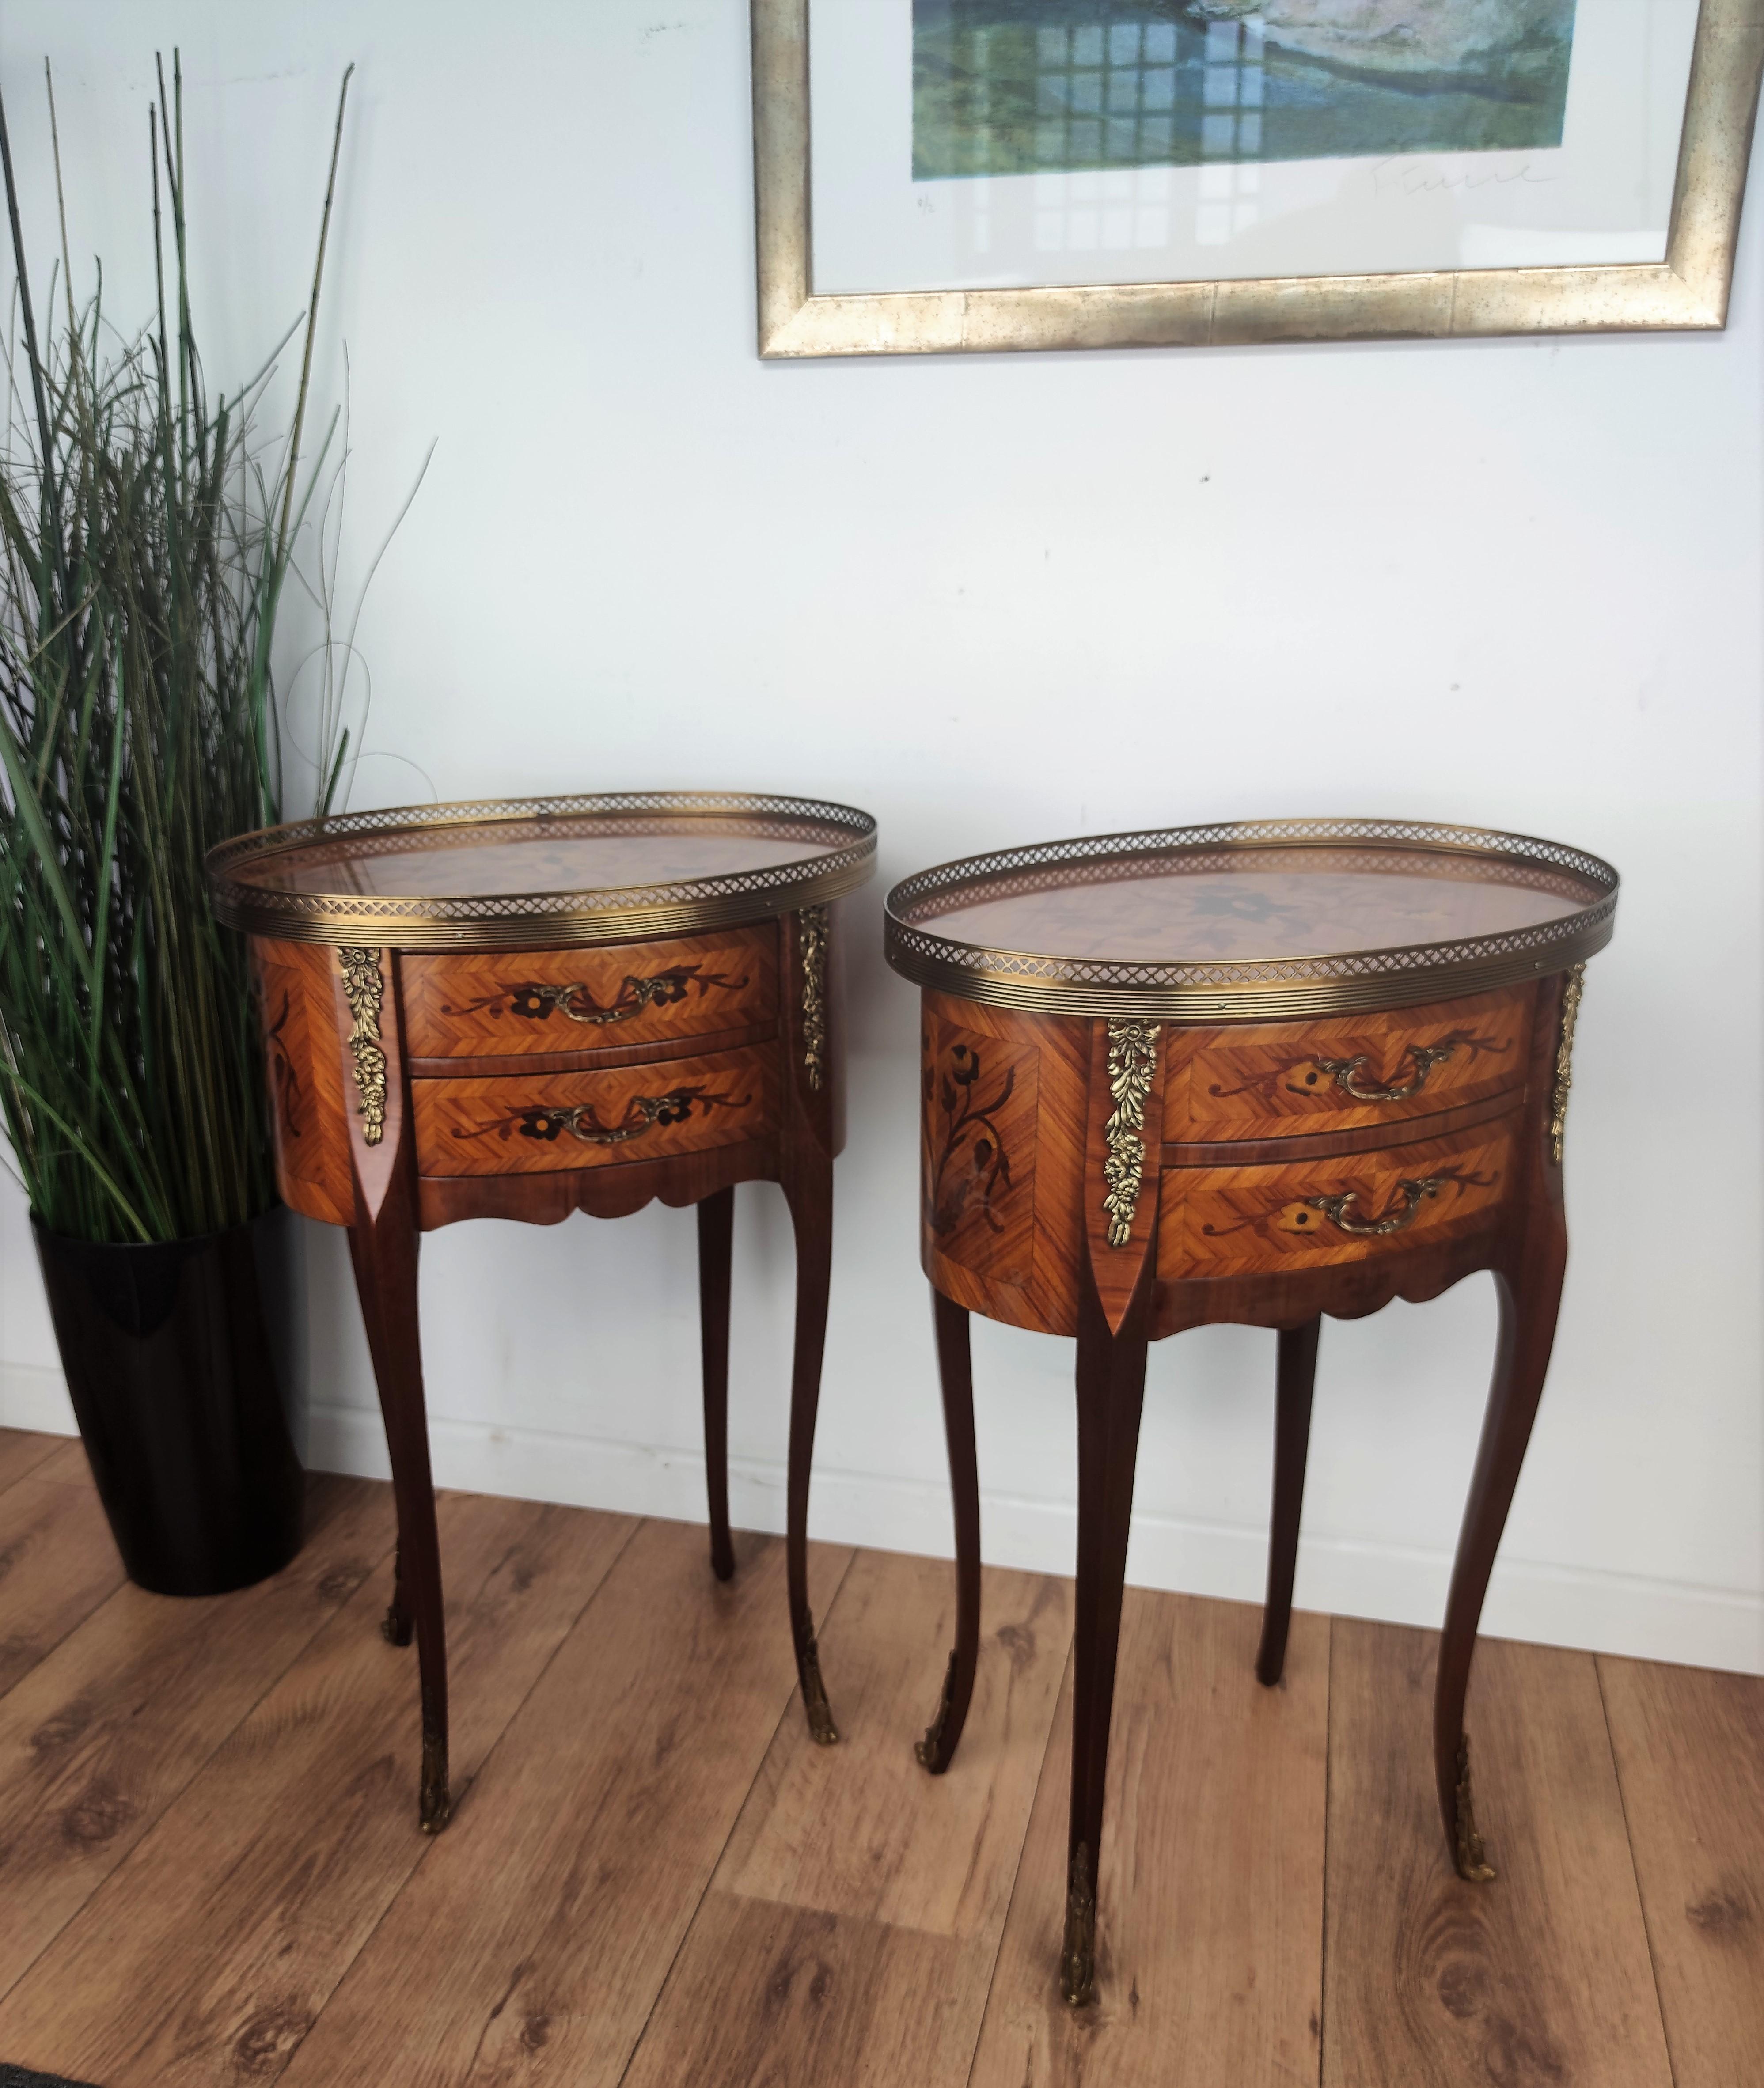 Pair of lovely antique Italian Louis XV floral inlay night stands or side tables having oval shaped inlay top, bronze ormolu frame and decors, floral satinwood inlay, beautiful wood grain, 2 dovetailed drawers, raised on four tall and slender